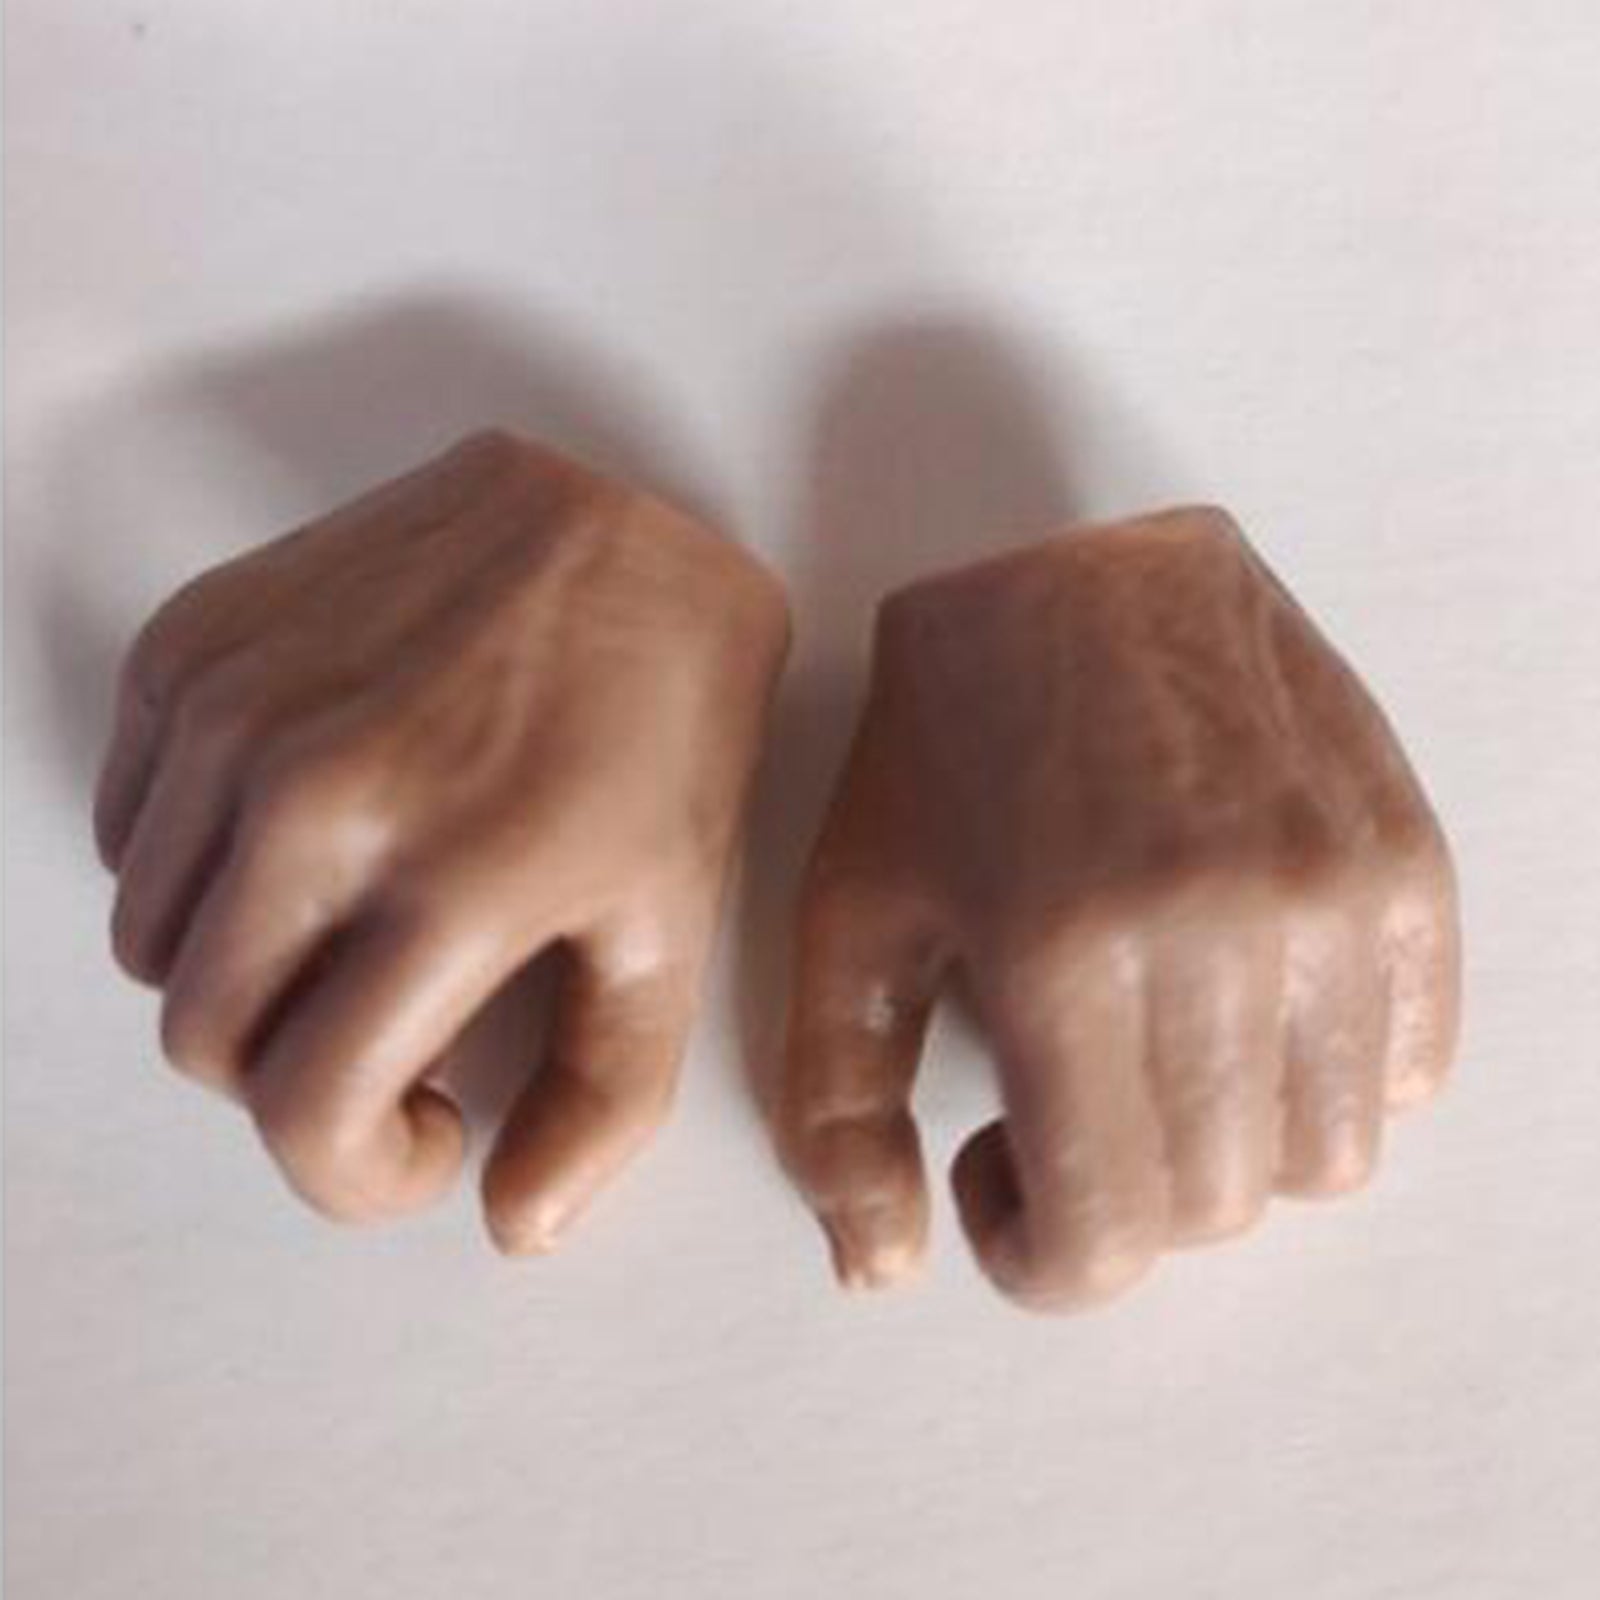 Nude Male / Female 1/6 Scale Action Figure Pair of Feet  Style 3